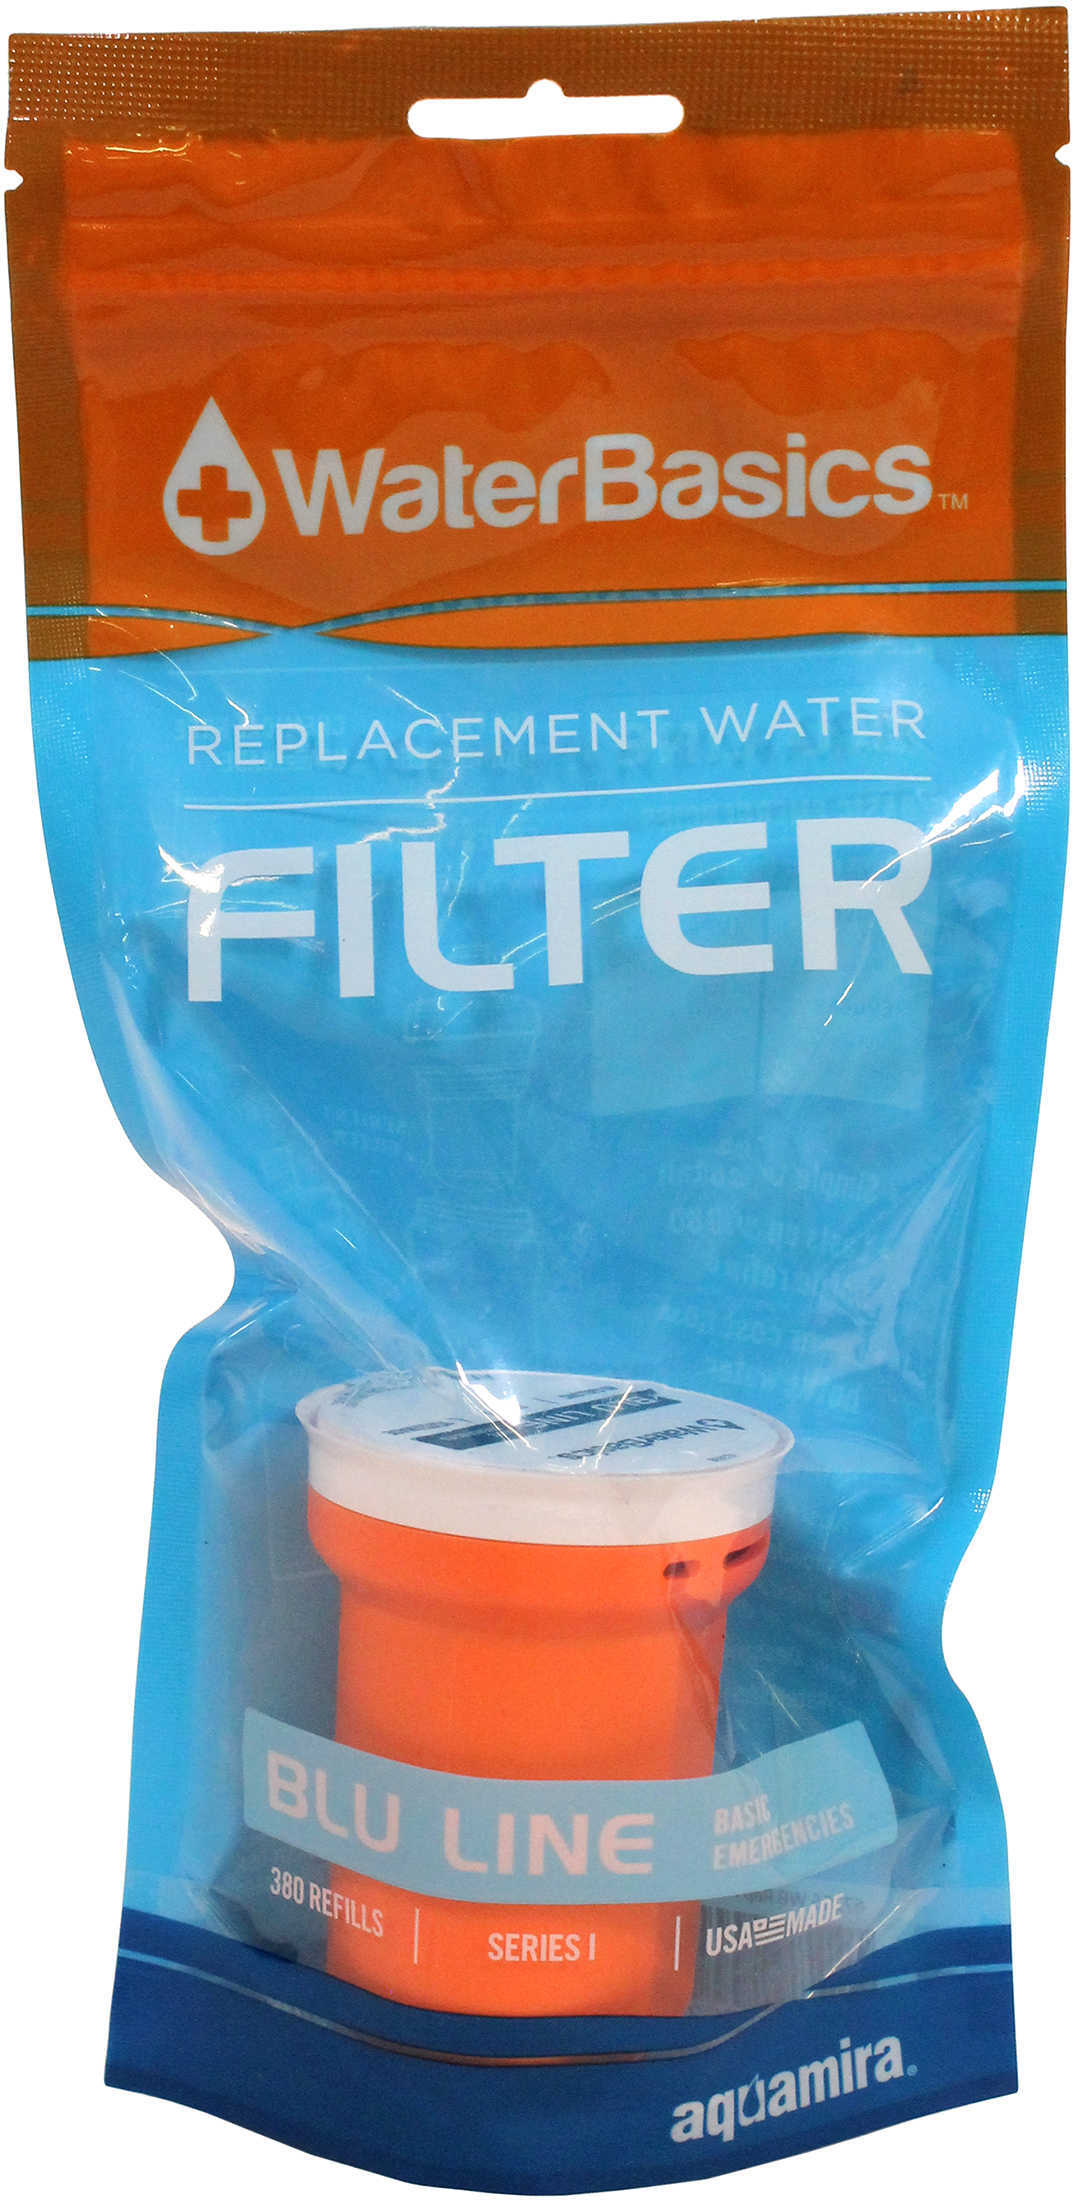 WaterBasics Replacement Filter (BLUE-I-60)